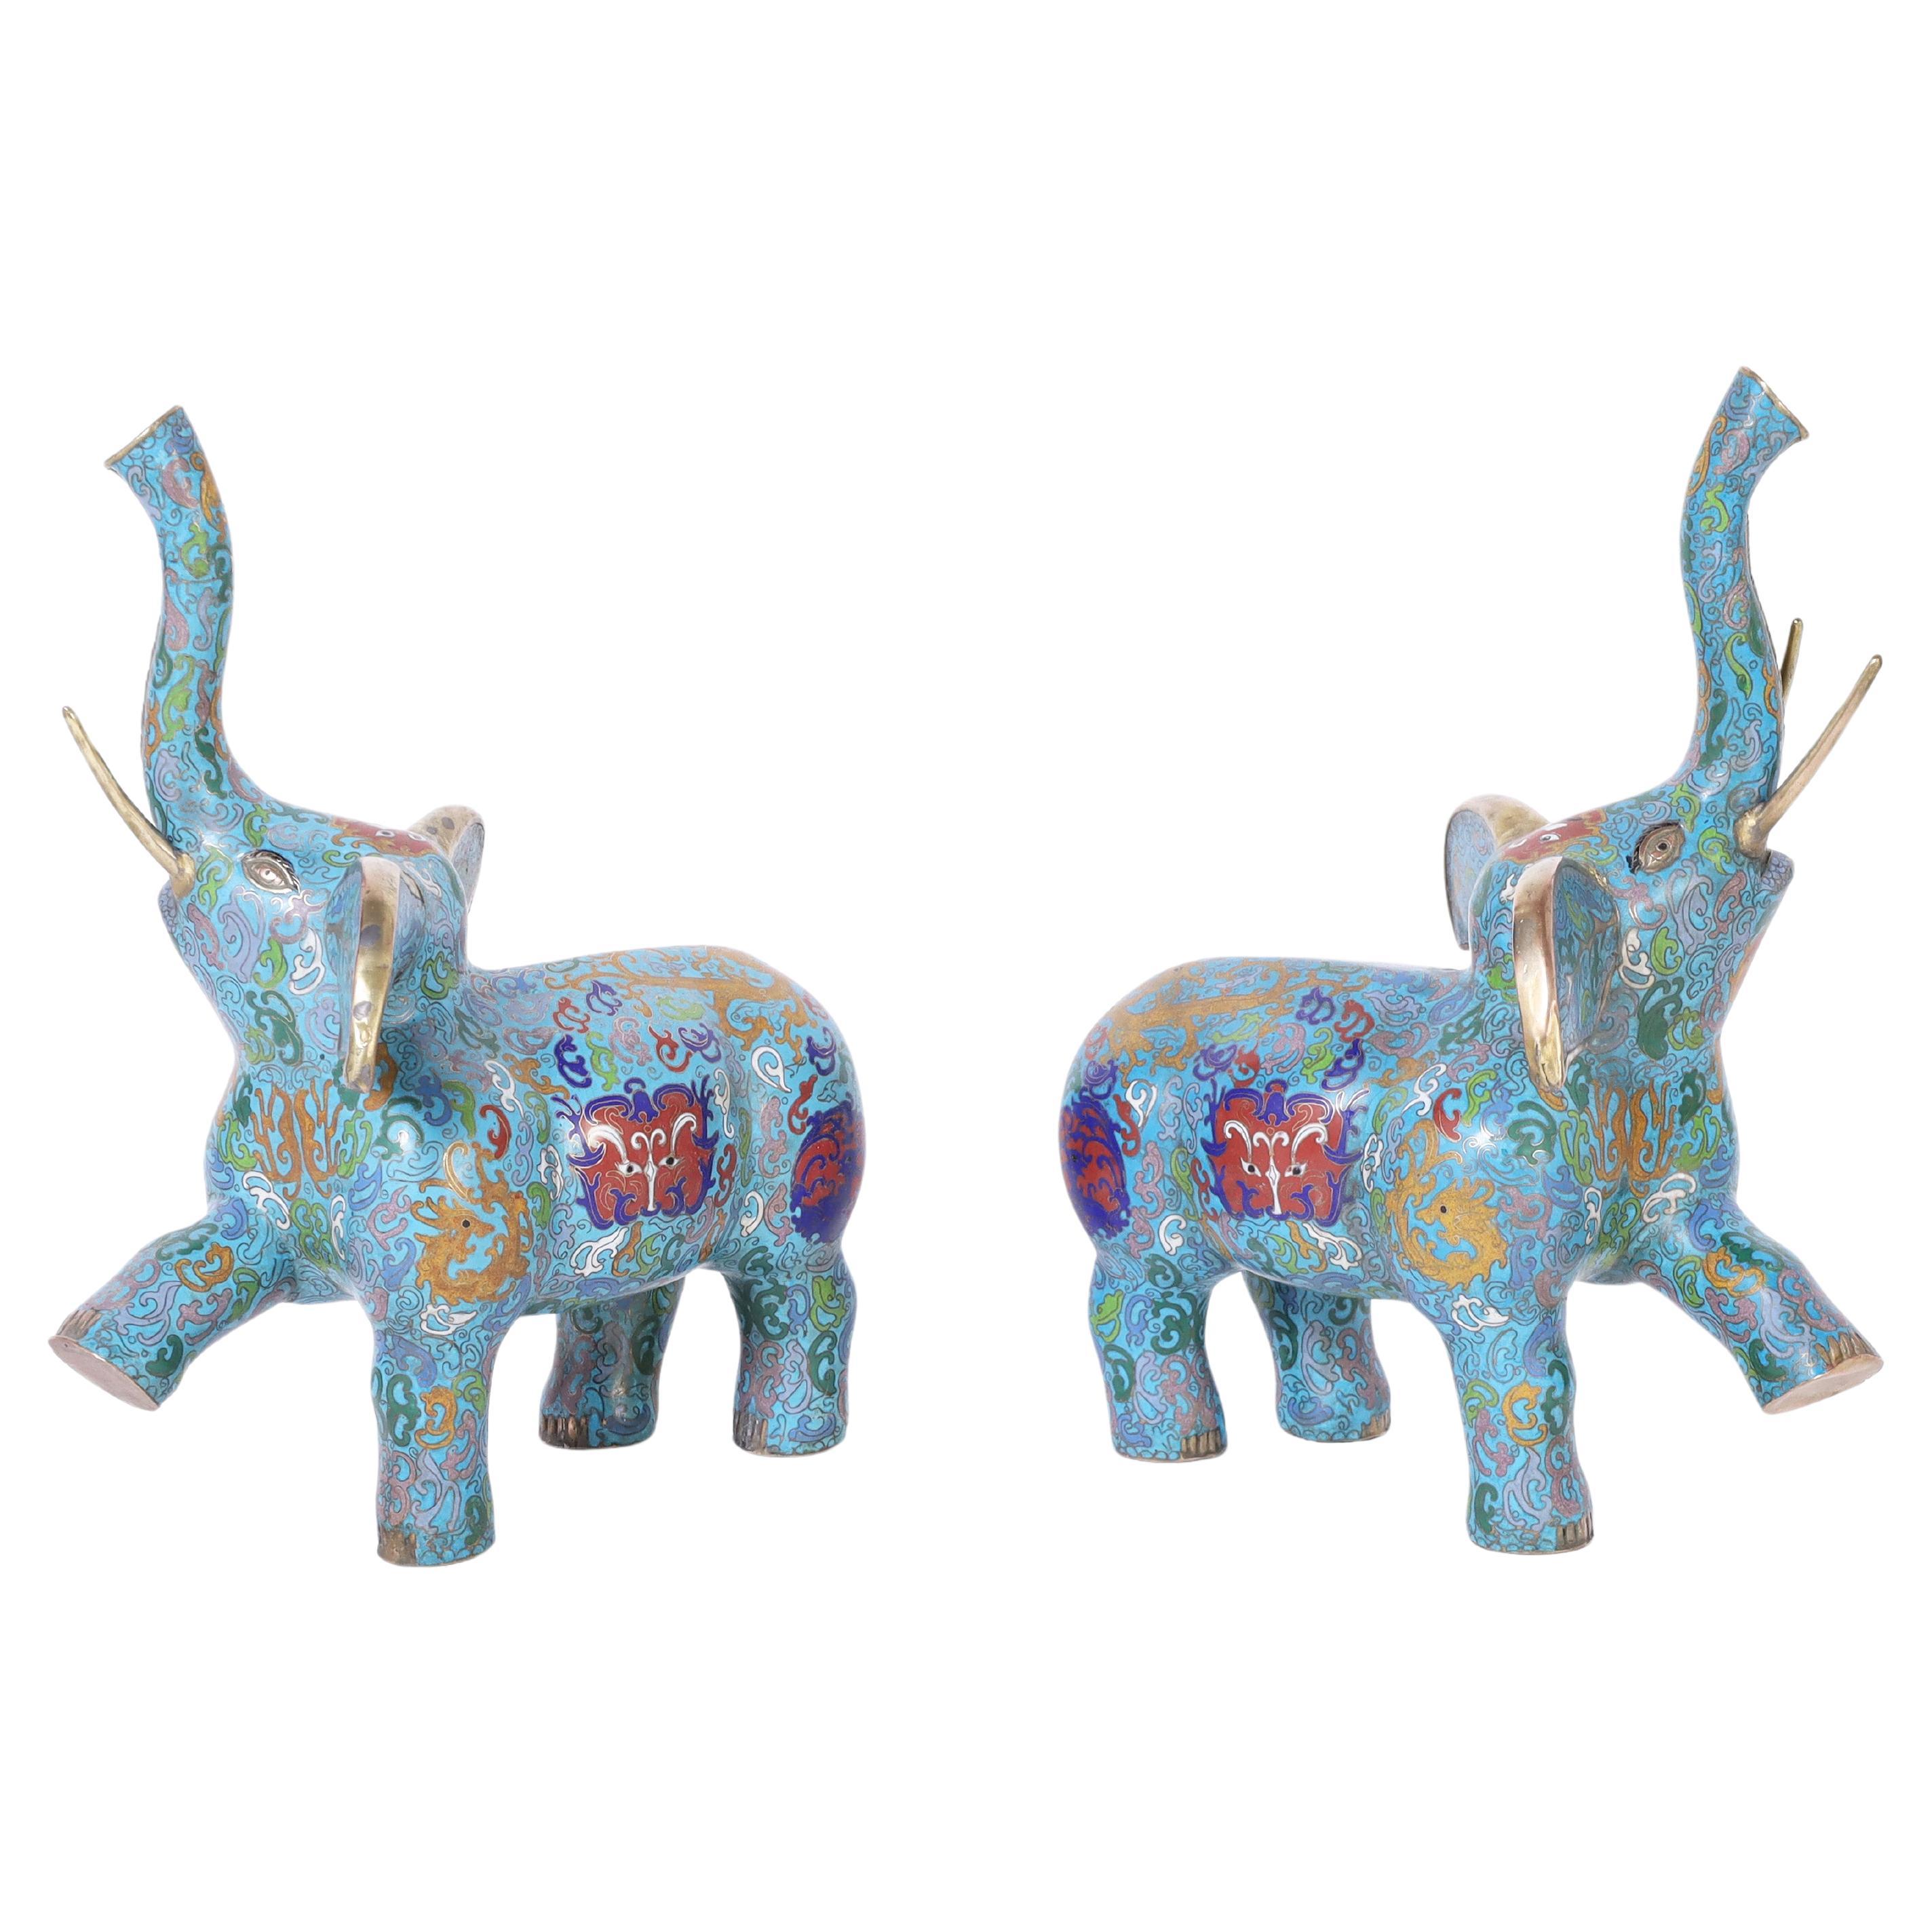 Pair of Chinese Cloisonne Dancing Elephants